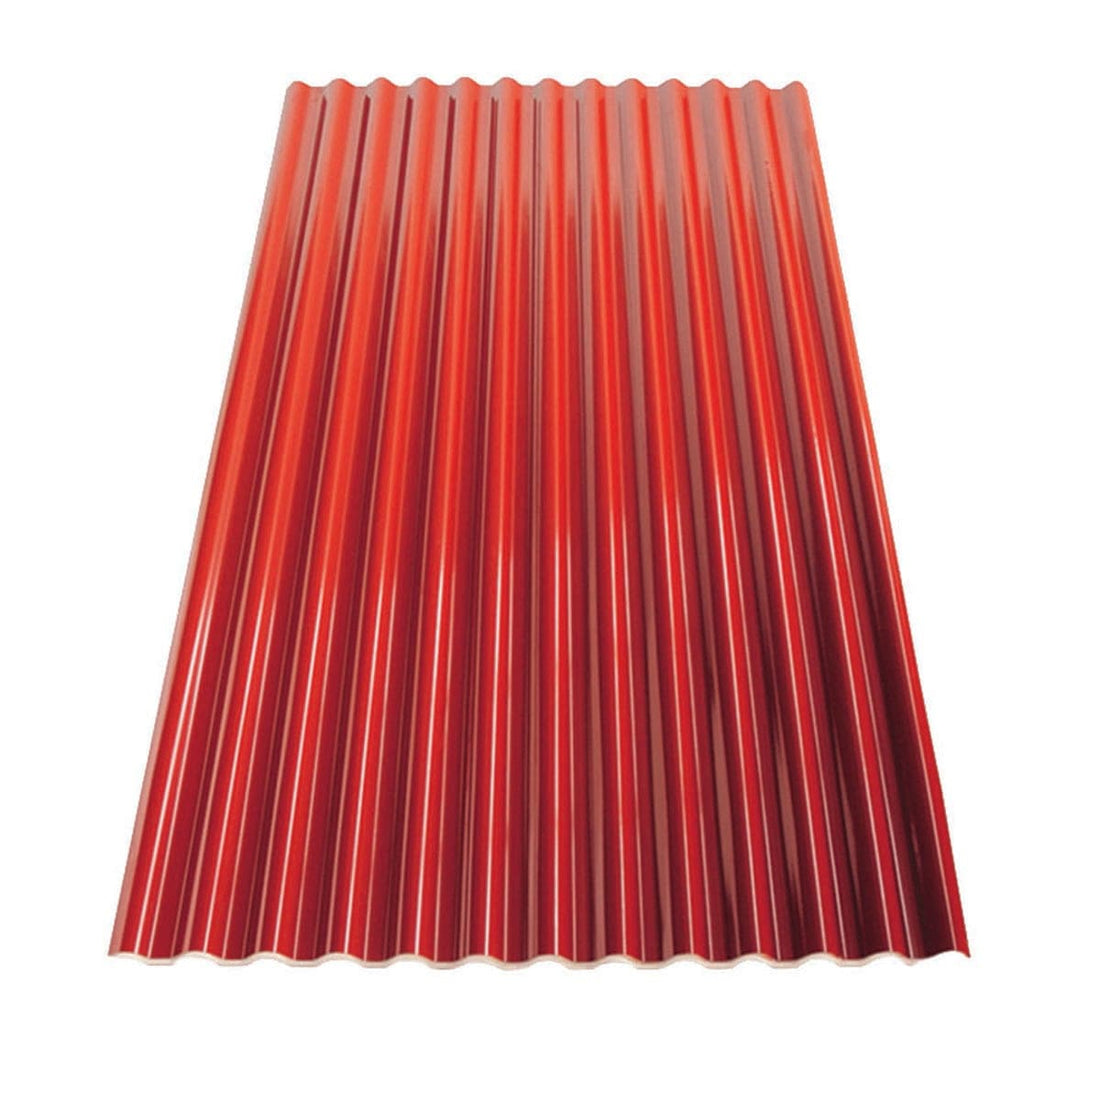 SIENA RED ECOLTHERM SHEET 2X1.104 - best price from Maltashopper.com BR450000991